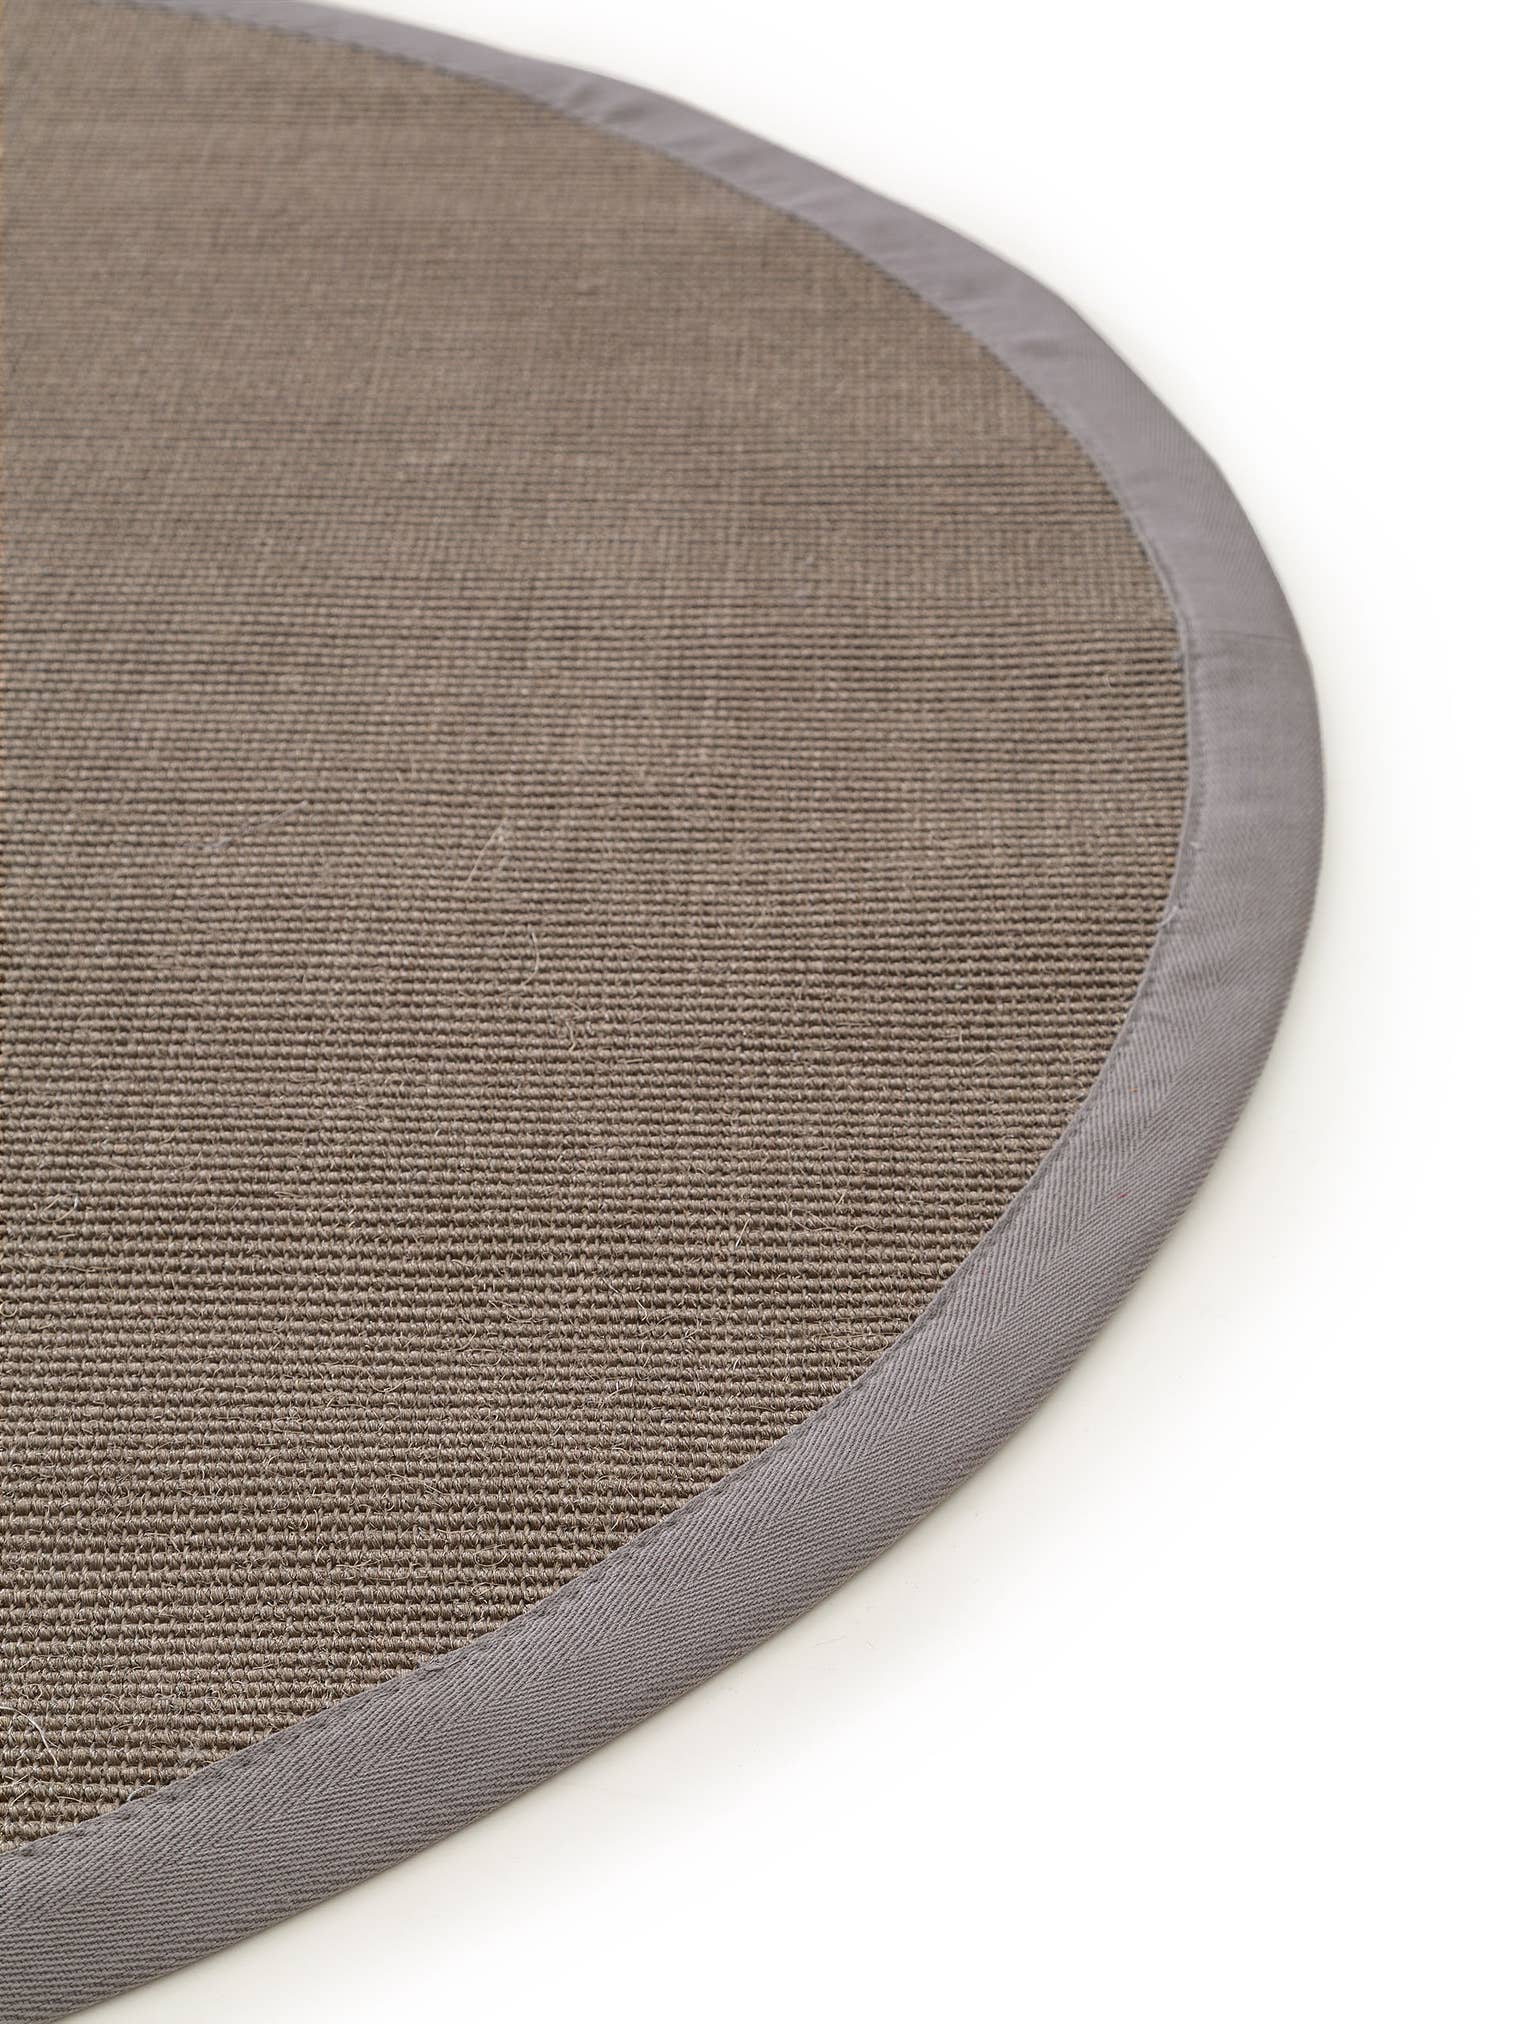 Rug made of 100% Sisal in Grey with a 1- 5 mm high pile by benuta Nest